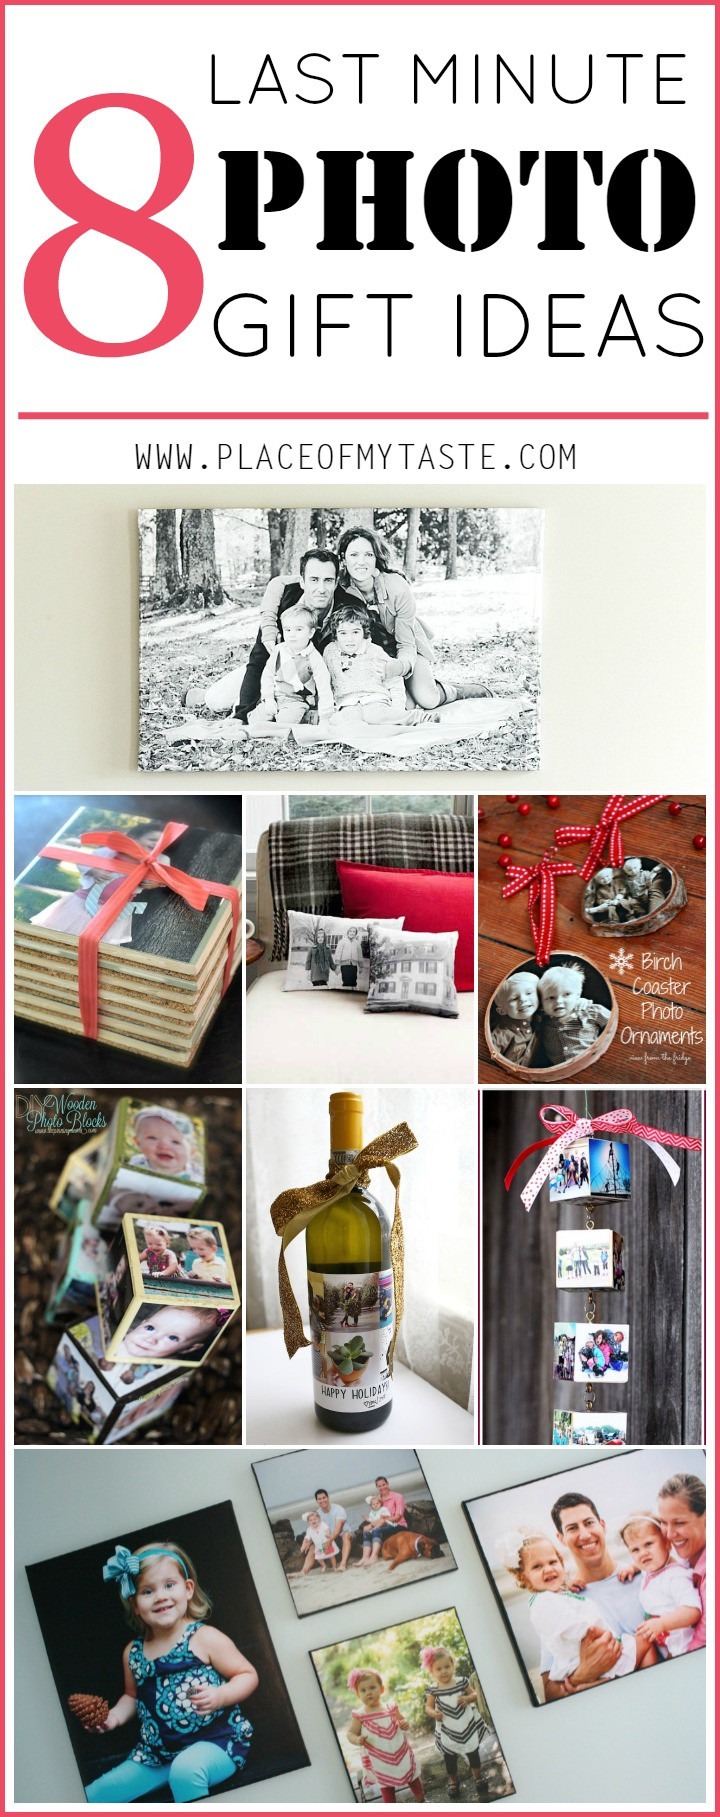 Best ideas about Last Minute Gift Ideas
. Save or Pin 8 LAST MINUTE PHOTO GIFT IDEAS Now.